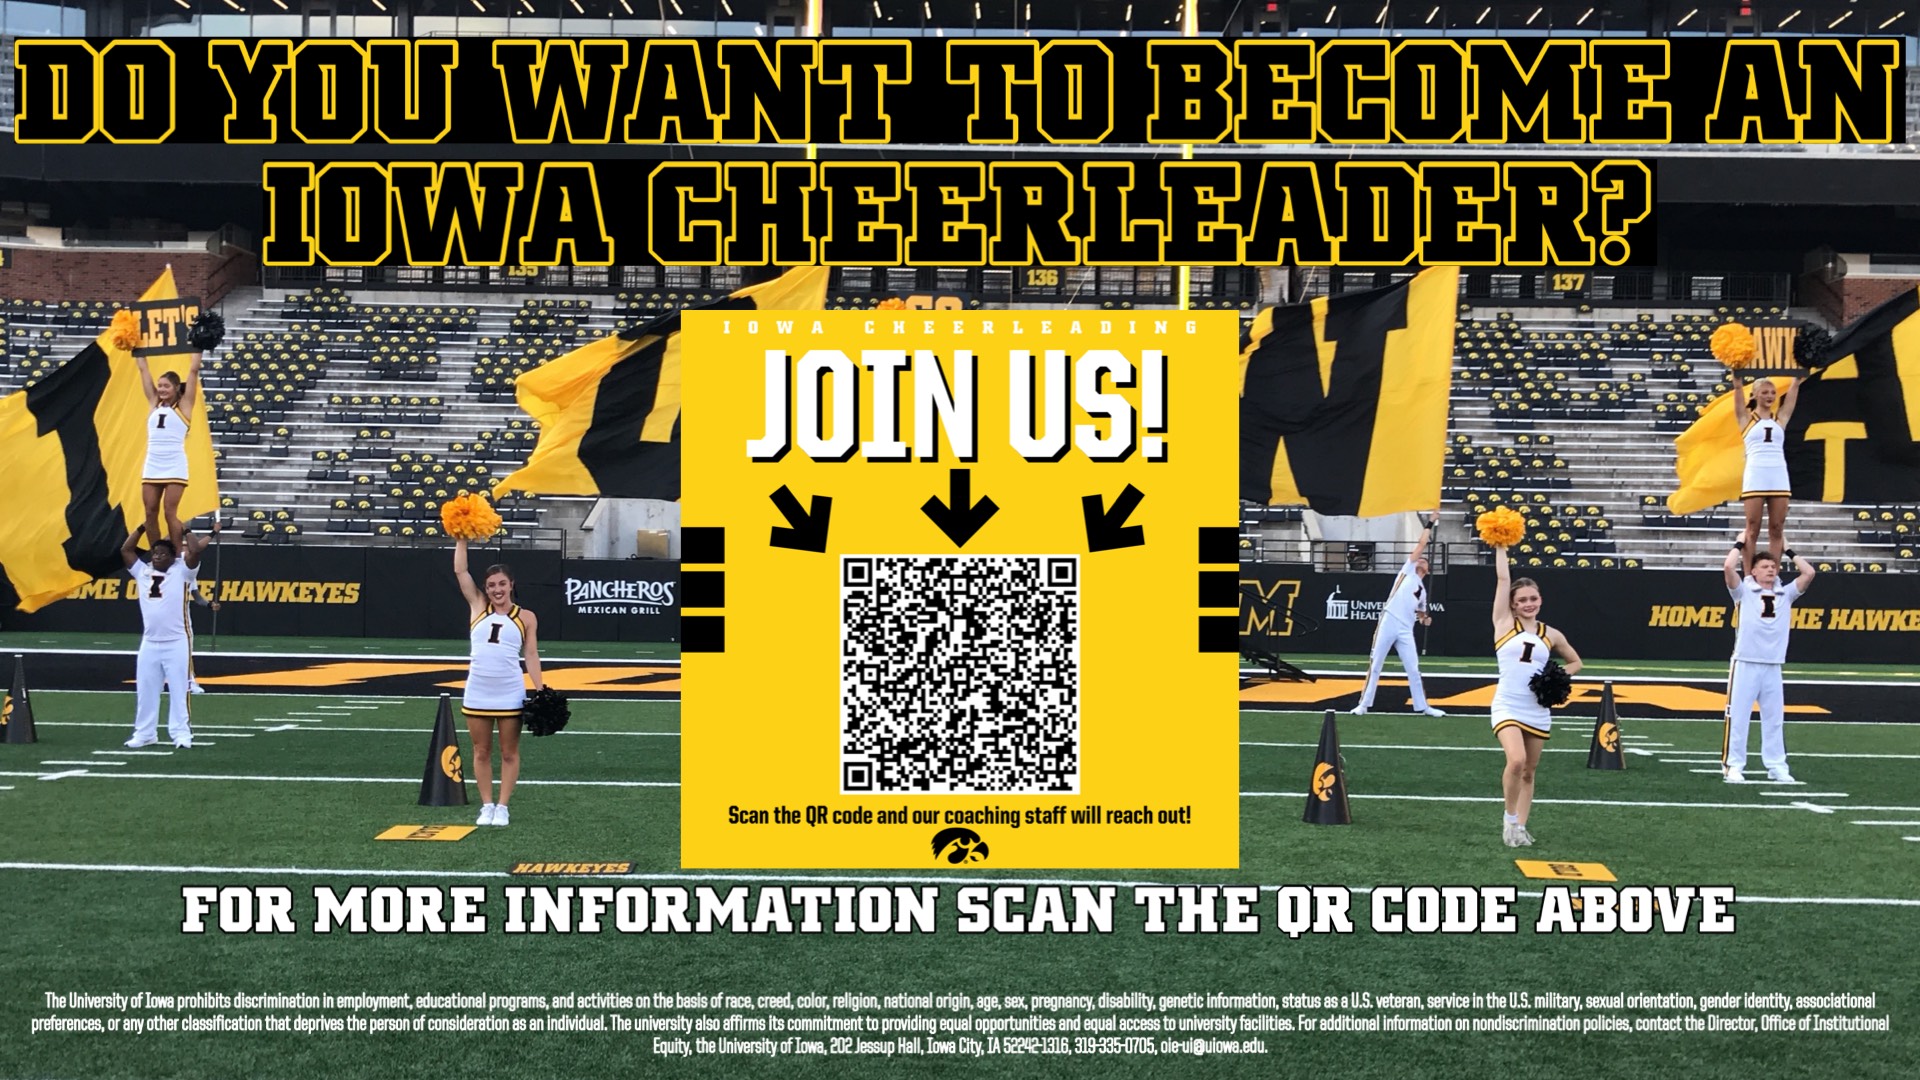 DO YOU WANT TO BECOME AN IOWA CHEERLEADER? Join us. Scan the QR Code and our coaching staff will reach out. For more information, scan the QR Code above.